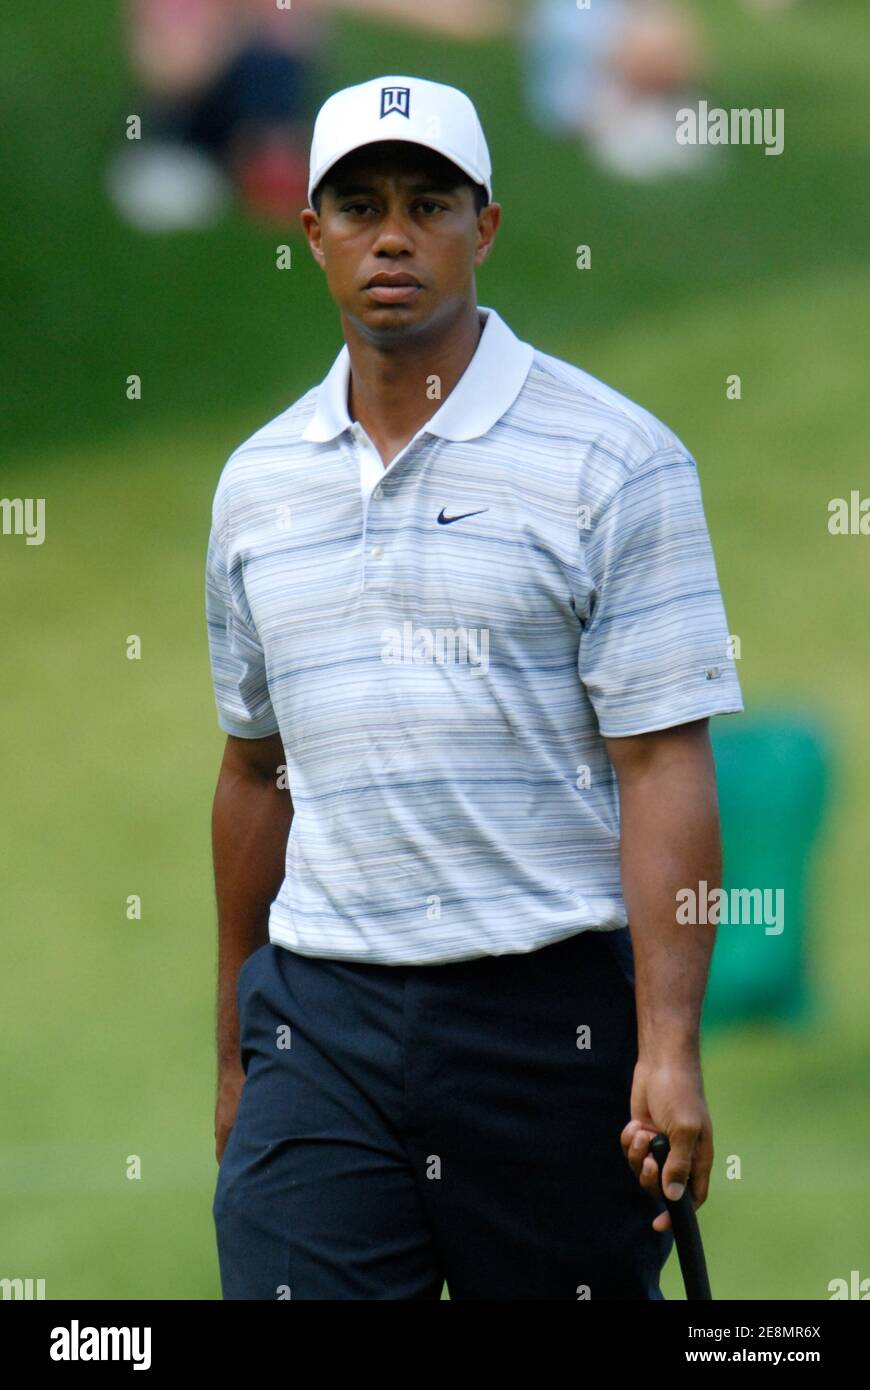 Tiger Woods during the Earl Woods Memorial Pro-Am, in Potomac, MD, USA on July 4, 2007. Photo by John C. Middlebrook/Cal Sport Media/Cameleon/ABACAPRESS.COM Stock Photo